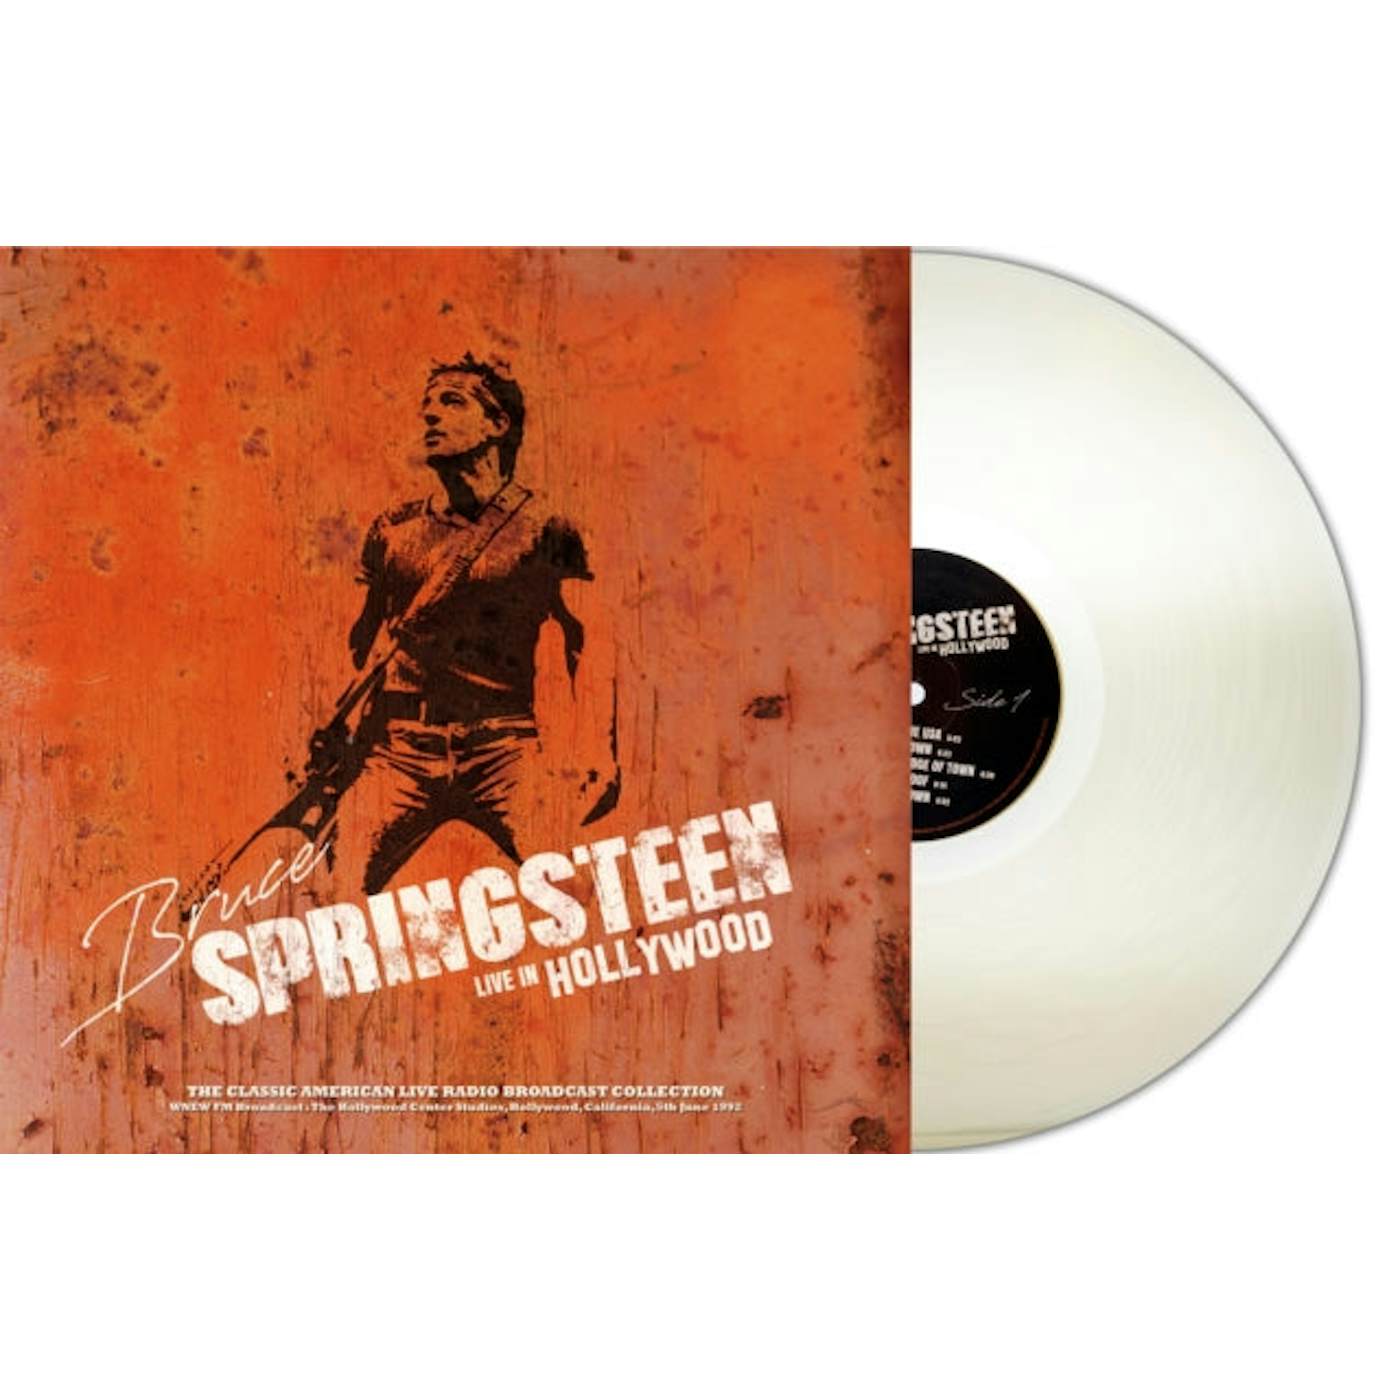 Bruce Springsteen LP Vinyl Record - WNEW FM Broadcast The Hollywood Center Studios Hollywood Ca 5th June 19 92 (Natural Clear Vinyl)